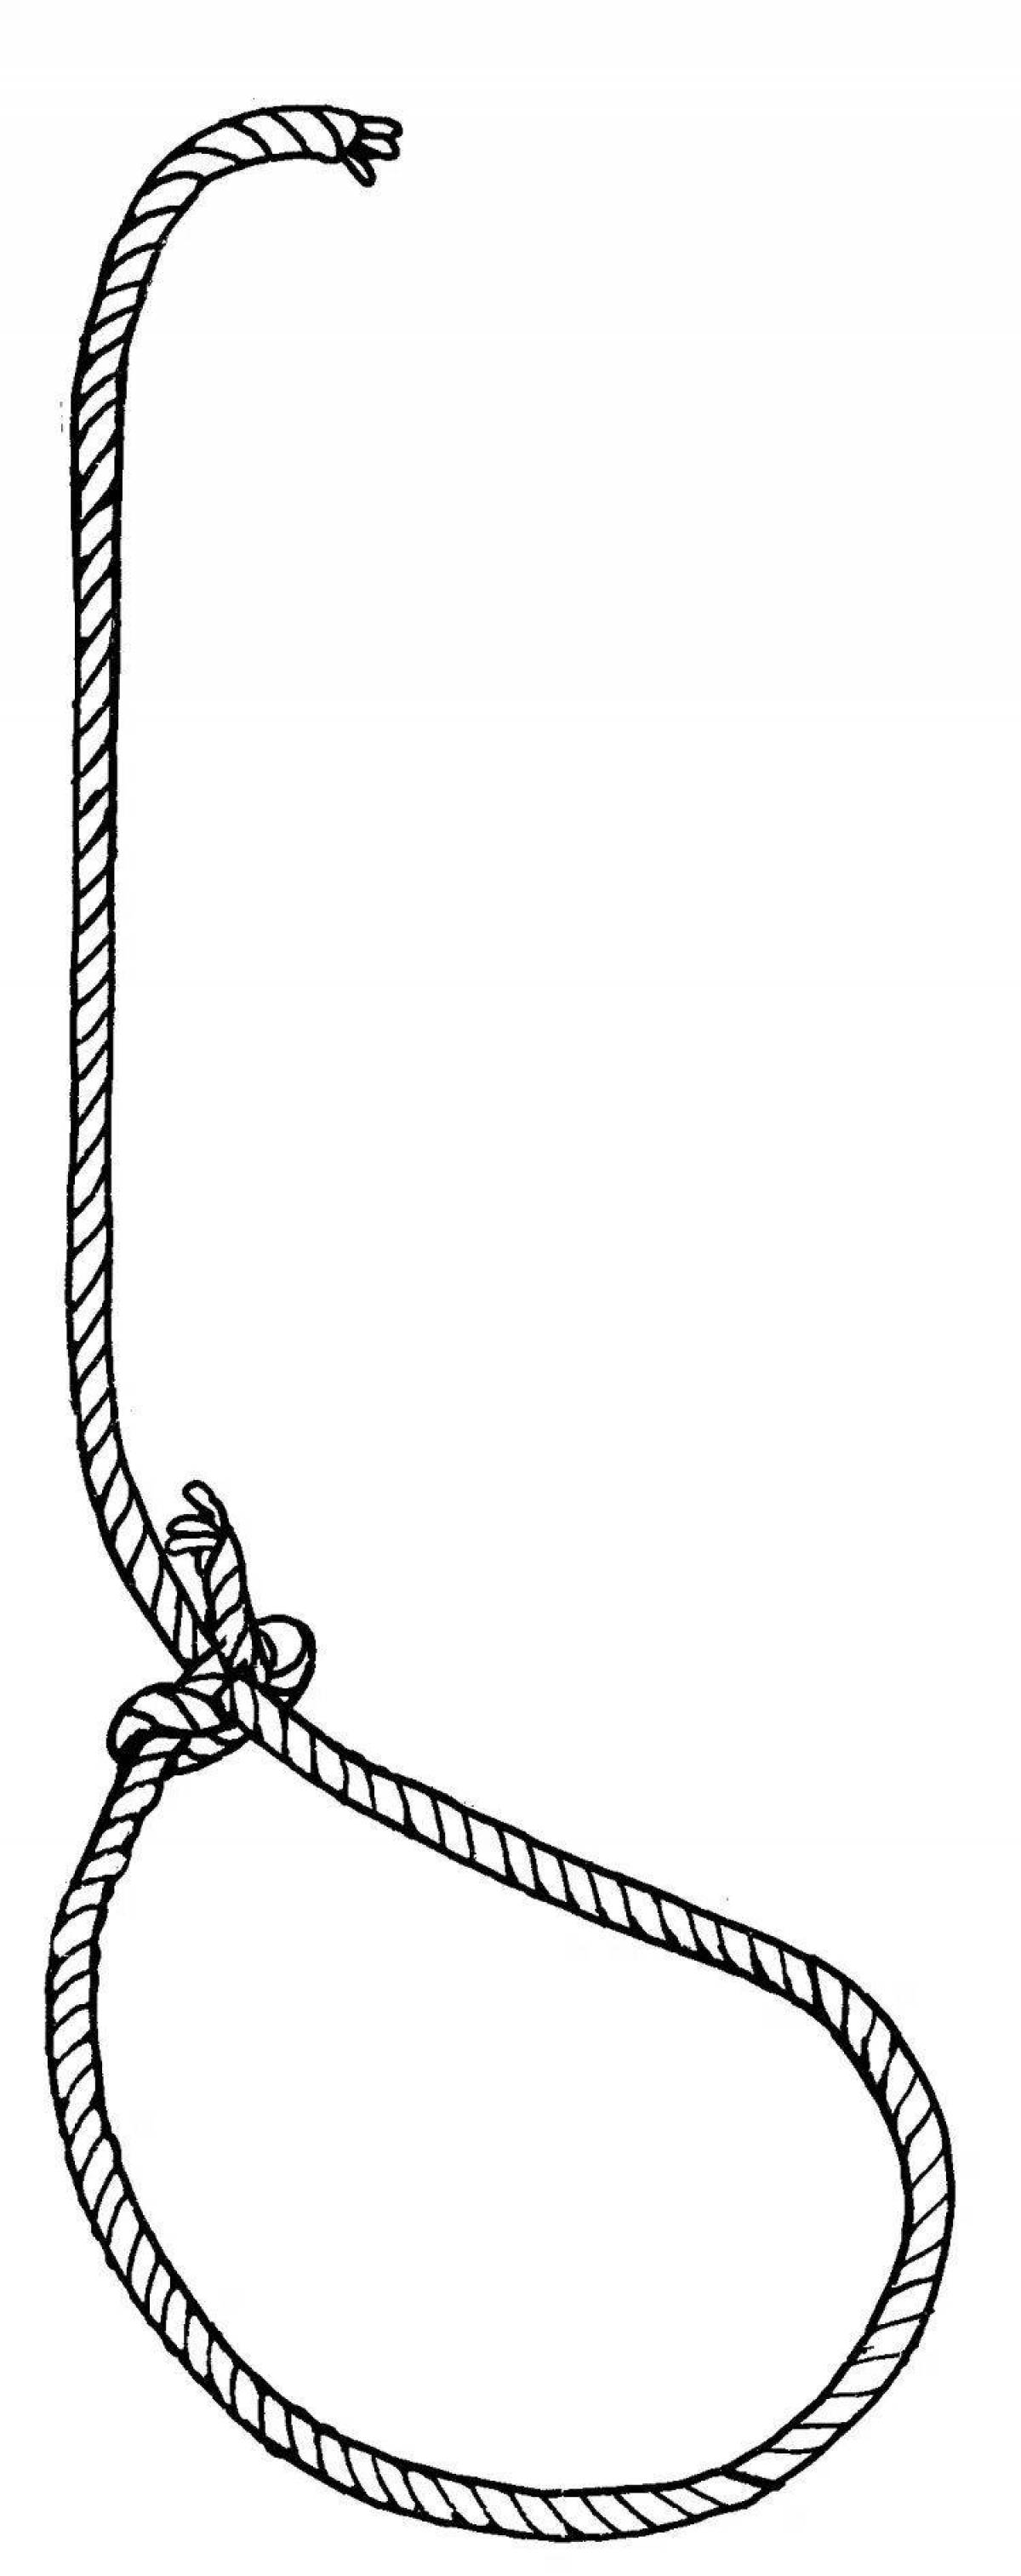 Crazy rope coloring page